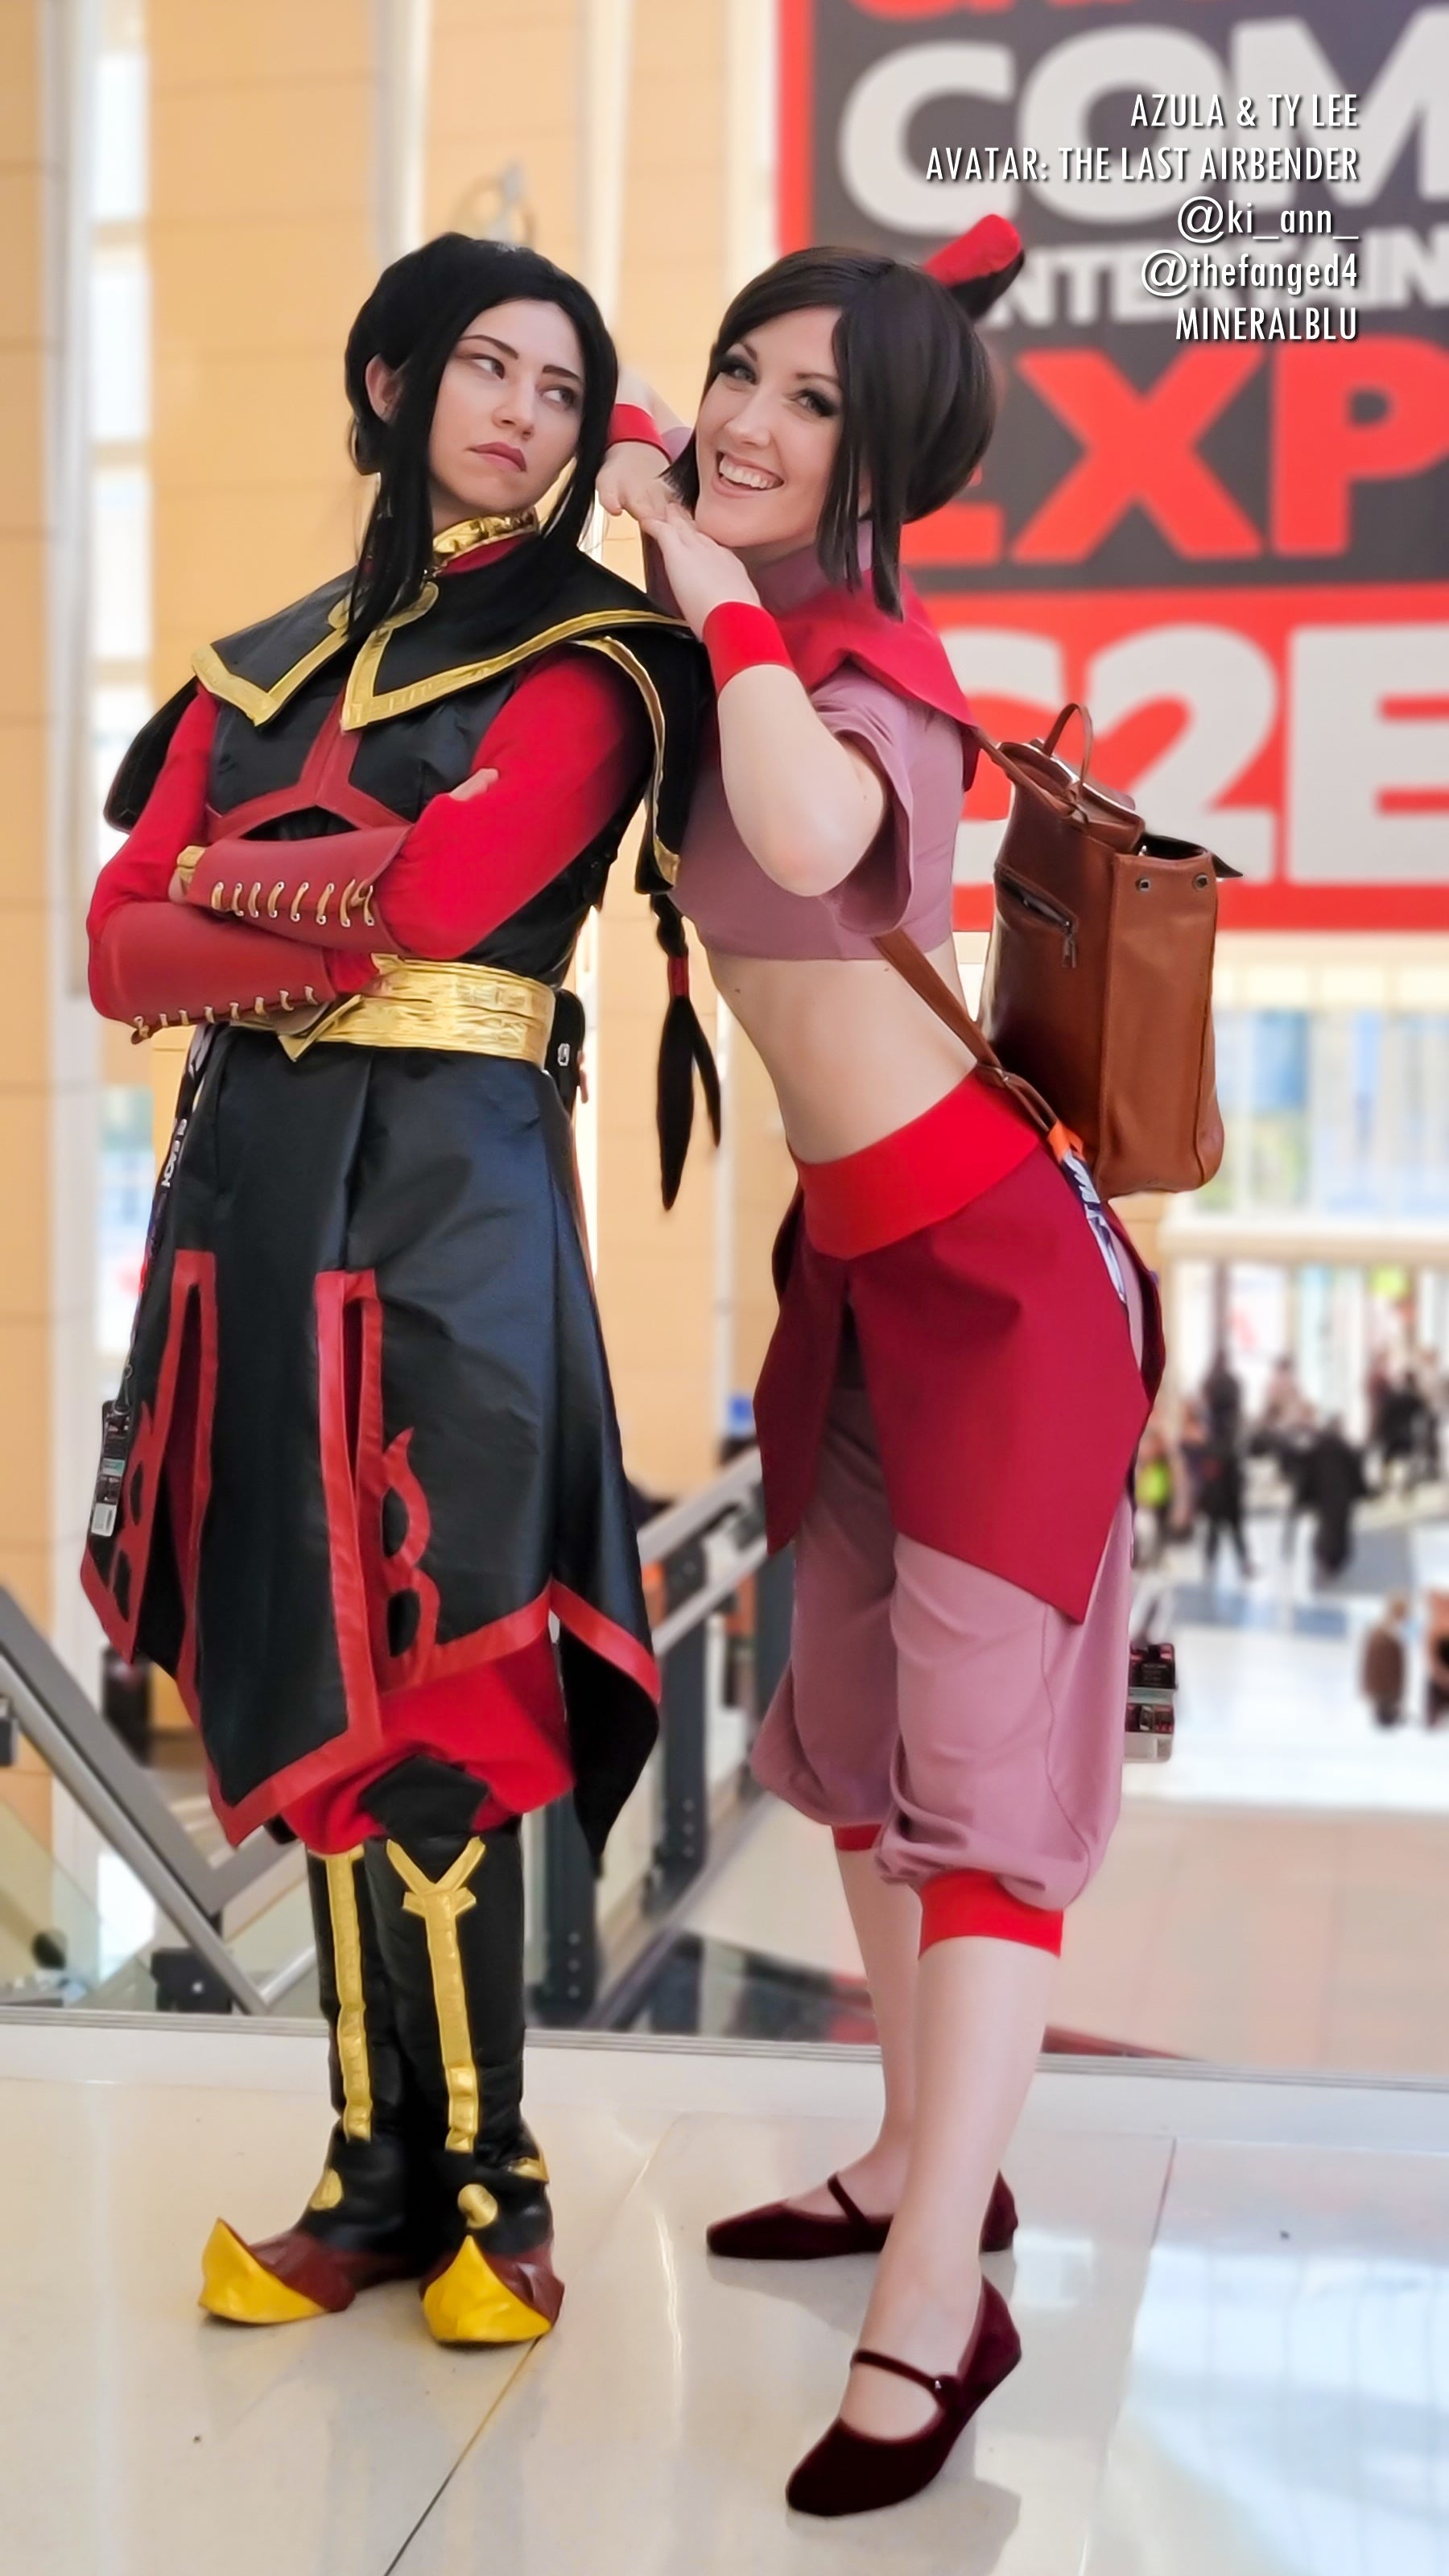 Our Favourite Cosplay From C2E2 2022